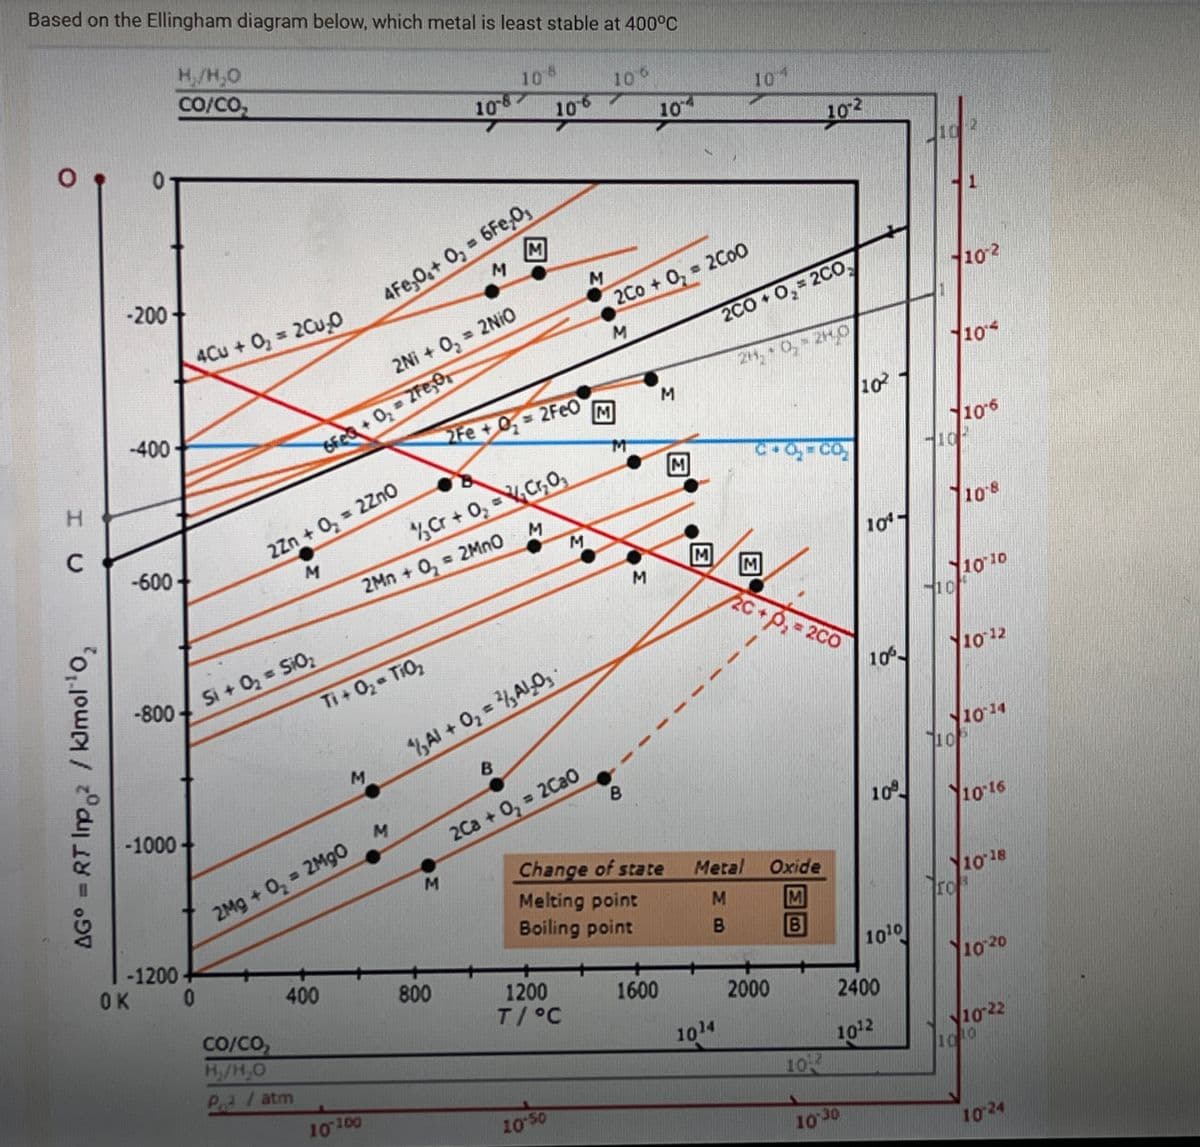 Based on the Ellingham diagram below, which metal is least stable at 400°C
H,/H,0
CO/Co,
108
8
10
106
9-
10
10
10
102
M
-200
4Fe,0,+ 0, 6Fe,0,
4Cu +O, = 2Cu,0
2Co+ 0, 2C00
102
2Ni + 0, = 2NIO
2CO 0, 2CO.
24, 0, 2H0
10
-400
+ 0, ZFe,Or
2Fe+ 0, 2FeO
M
10
106
10
M
2Zn + 0, 2Zn0
%Cr + 0,Cr,0,
-600
108
2Mn + 0, 2MNO
10
M
M
2C+p, = 2C0
1010
10
-800
Si + 0, = SiO;
Ti +02 TiO
10
1012
Al + 0, = ,AL0,
-1000-
1014
10
B.
2Ca + 0, = 2CaO
10
1016
Change of state
Melting point
Boiling point
2Mg + 0, 2M90
M.
Metal Oxide
-1200
OK 0
Y1018
ro
M
B.
400
800
1010
CO/CO,
Hy/H,O
1200
T/°C
1600
1020
2000
2400
Pa /atm
1014
1012
102
1022
100
10100
1050
1030
1024
AG° = RT Imp /kJmol'o,
HC
